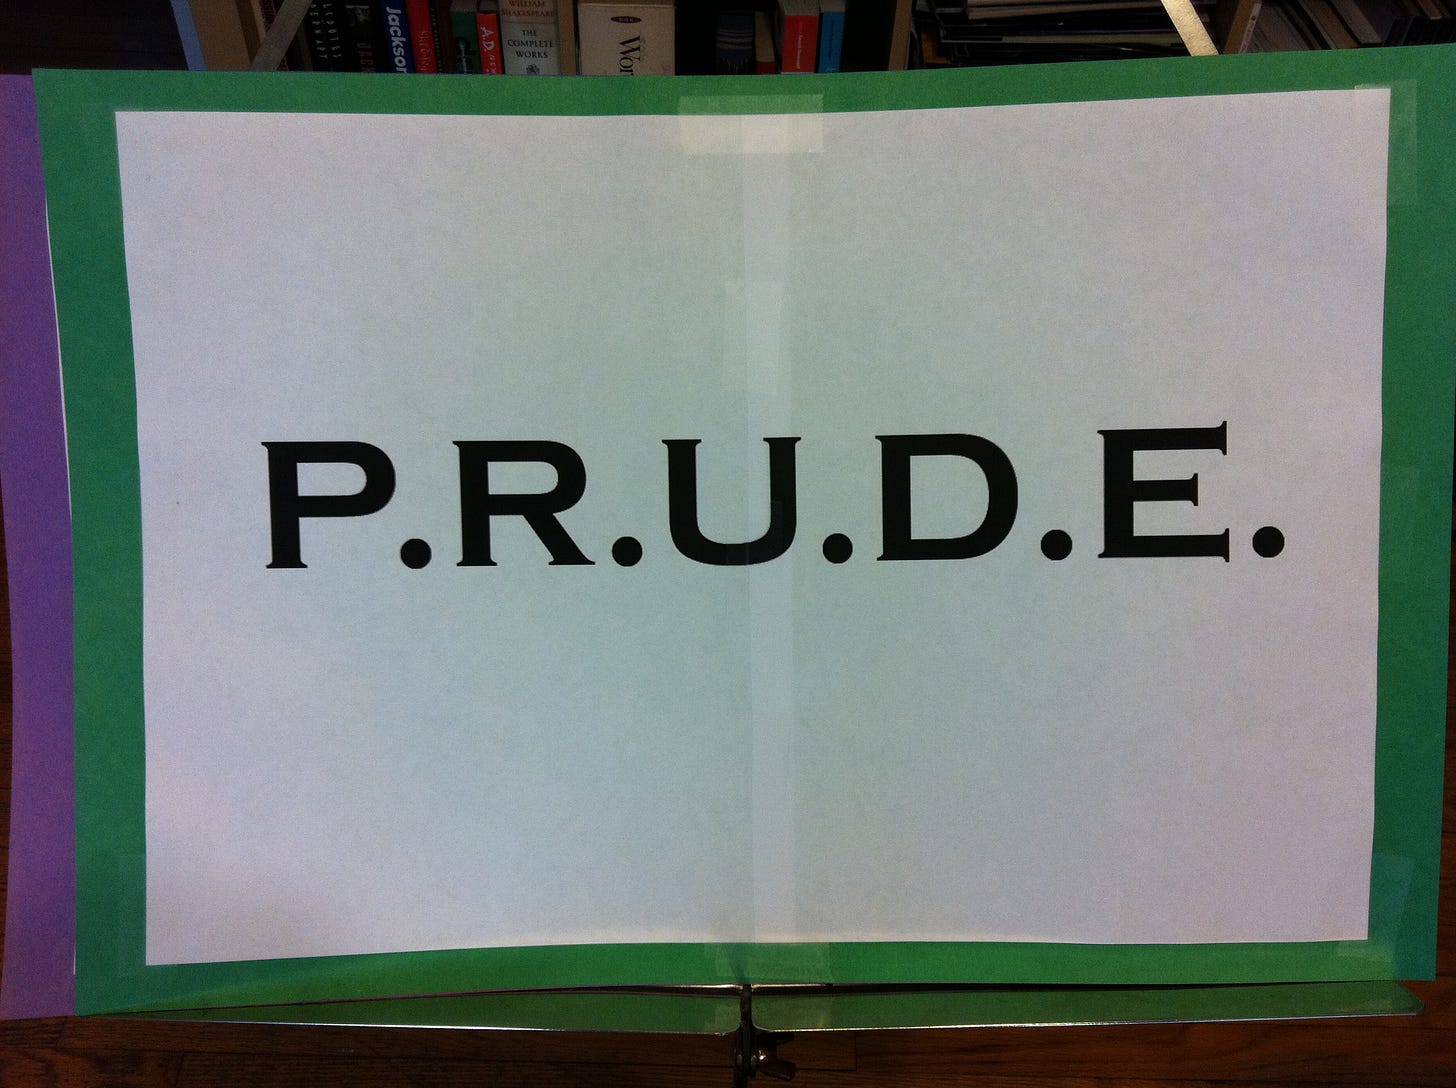 A sign mounted on green construction paper reads: "P.R.U.D.E."